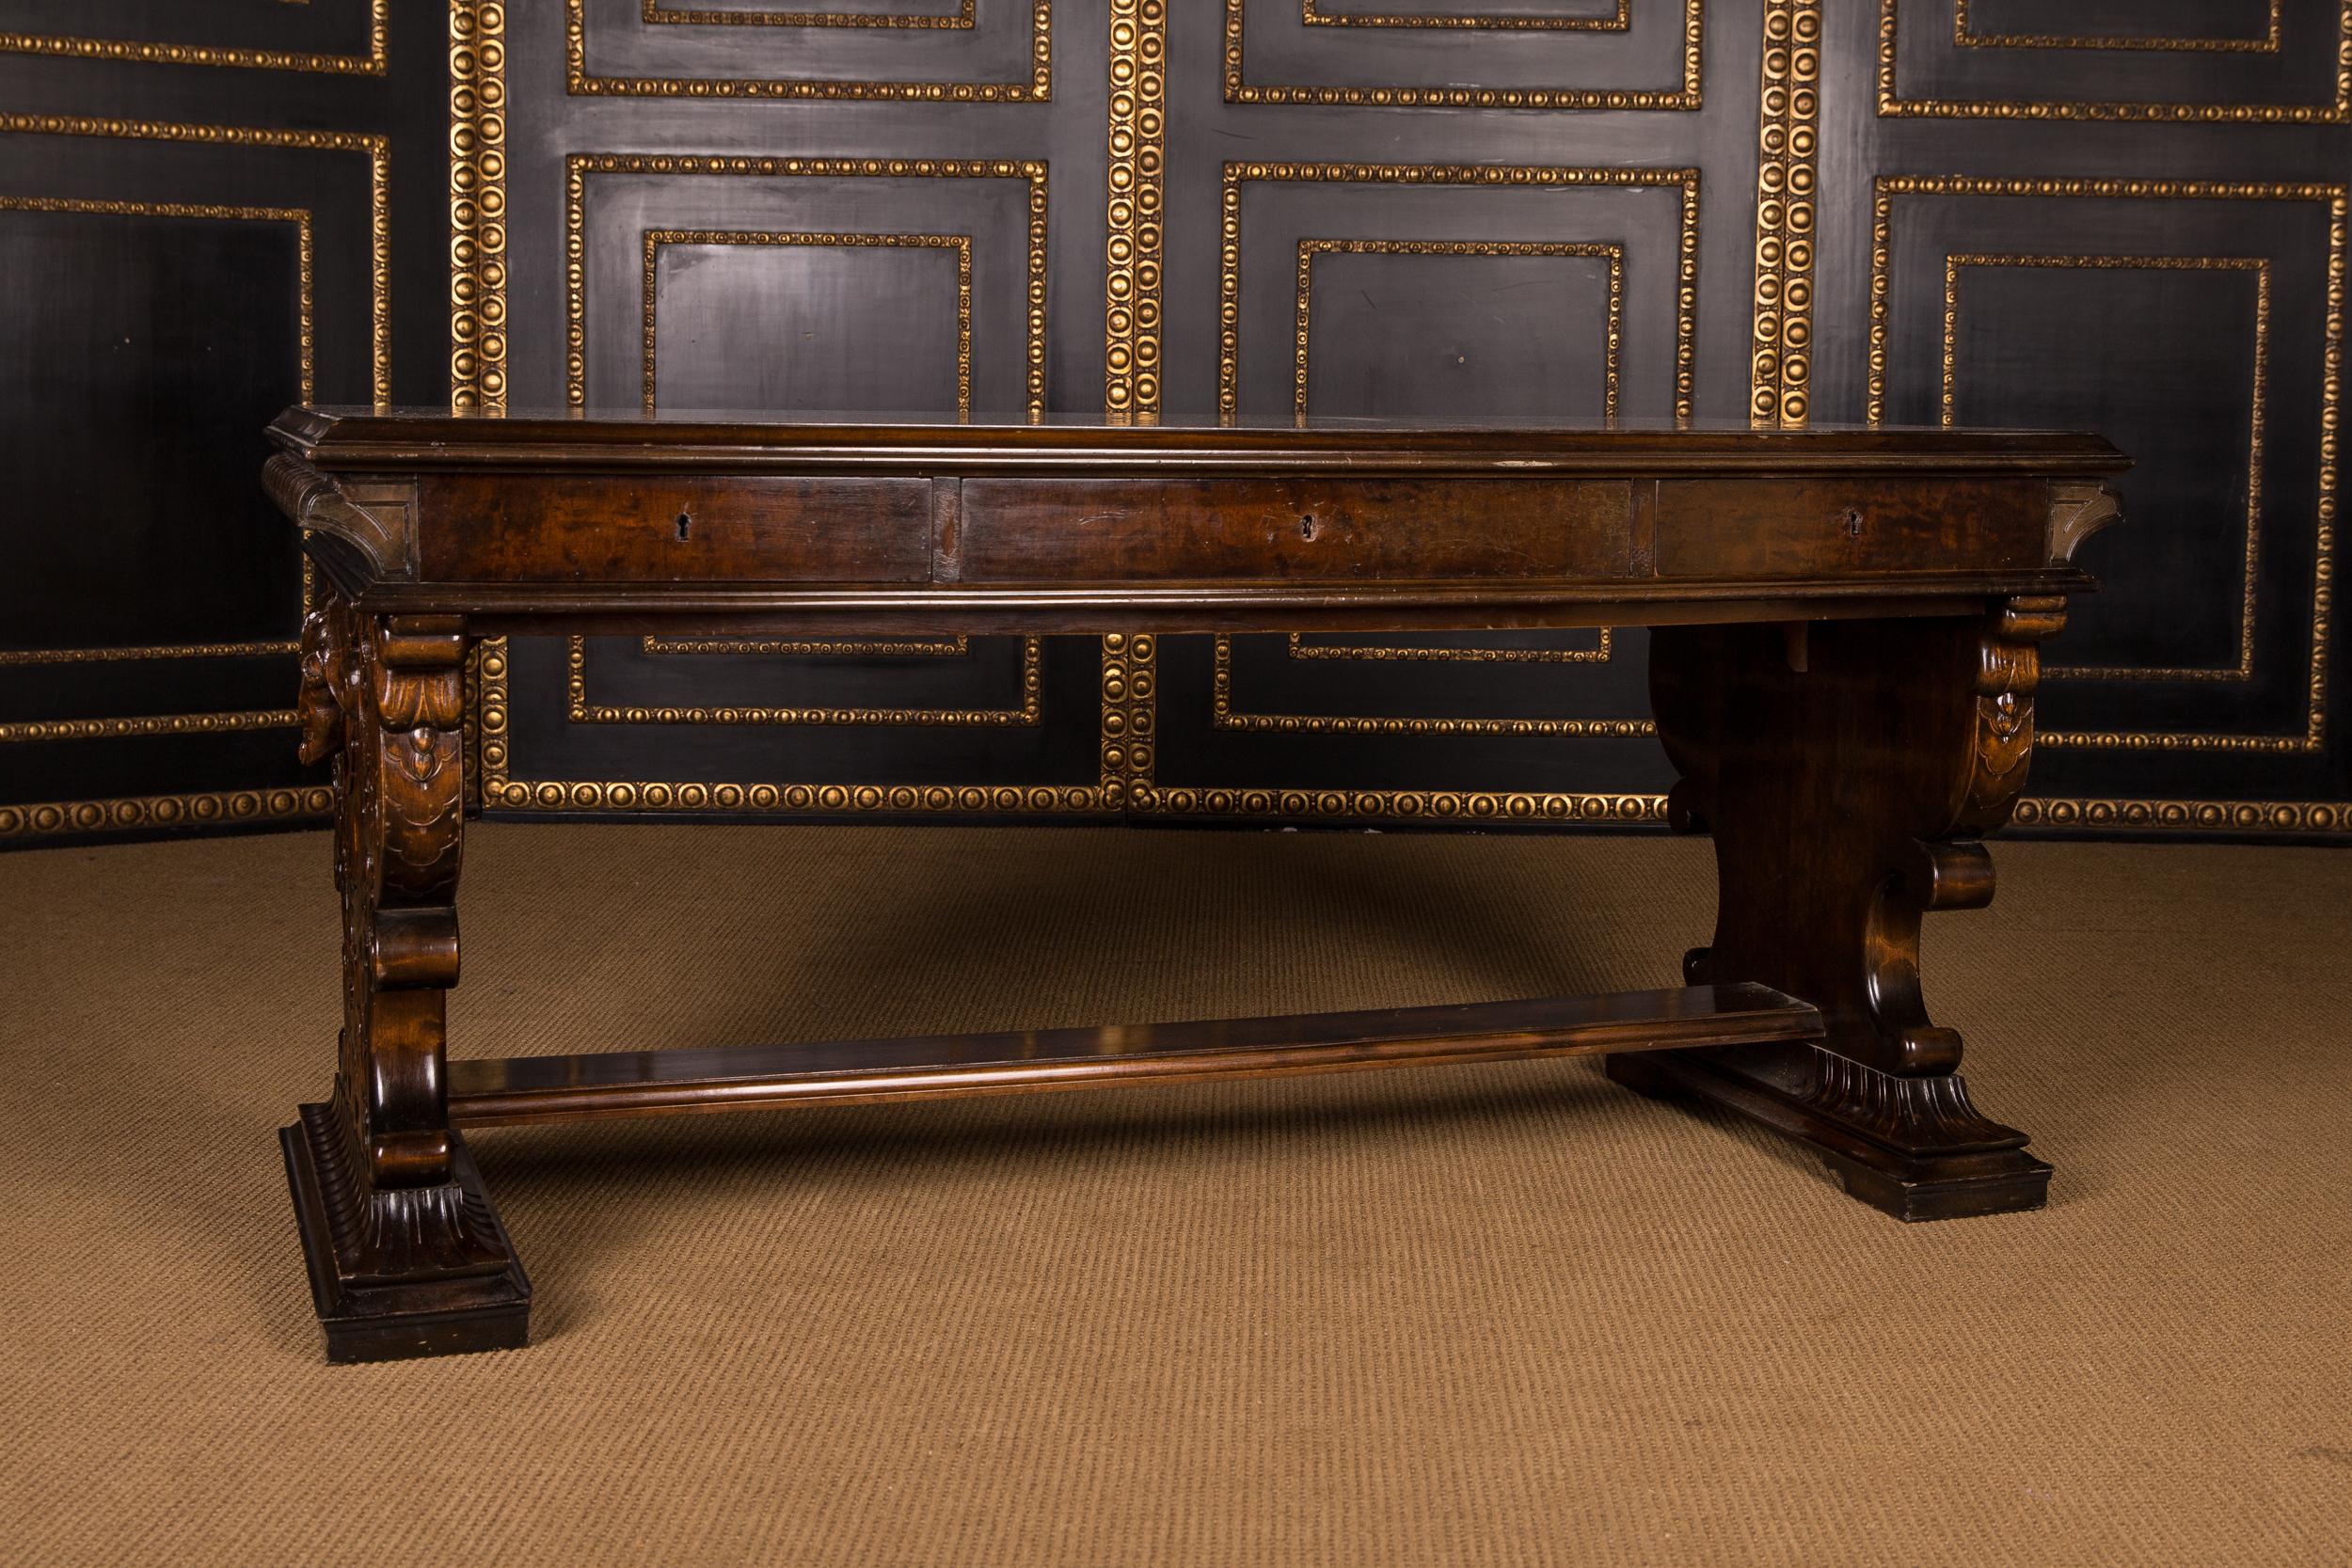 Oakwood. Straight body ending on curly, volute-shaped legs. Richly carved on all sides. Slightly protruding tabletop, including the middle drawer. The desk is free in the room.
 